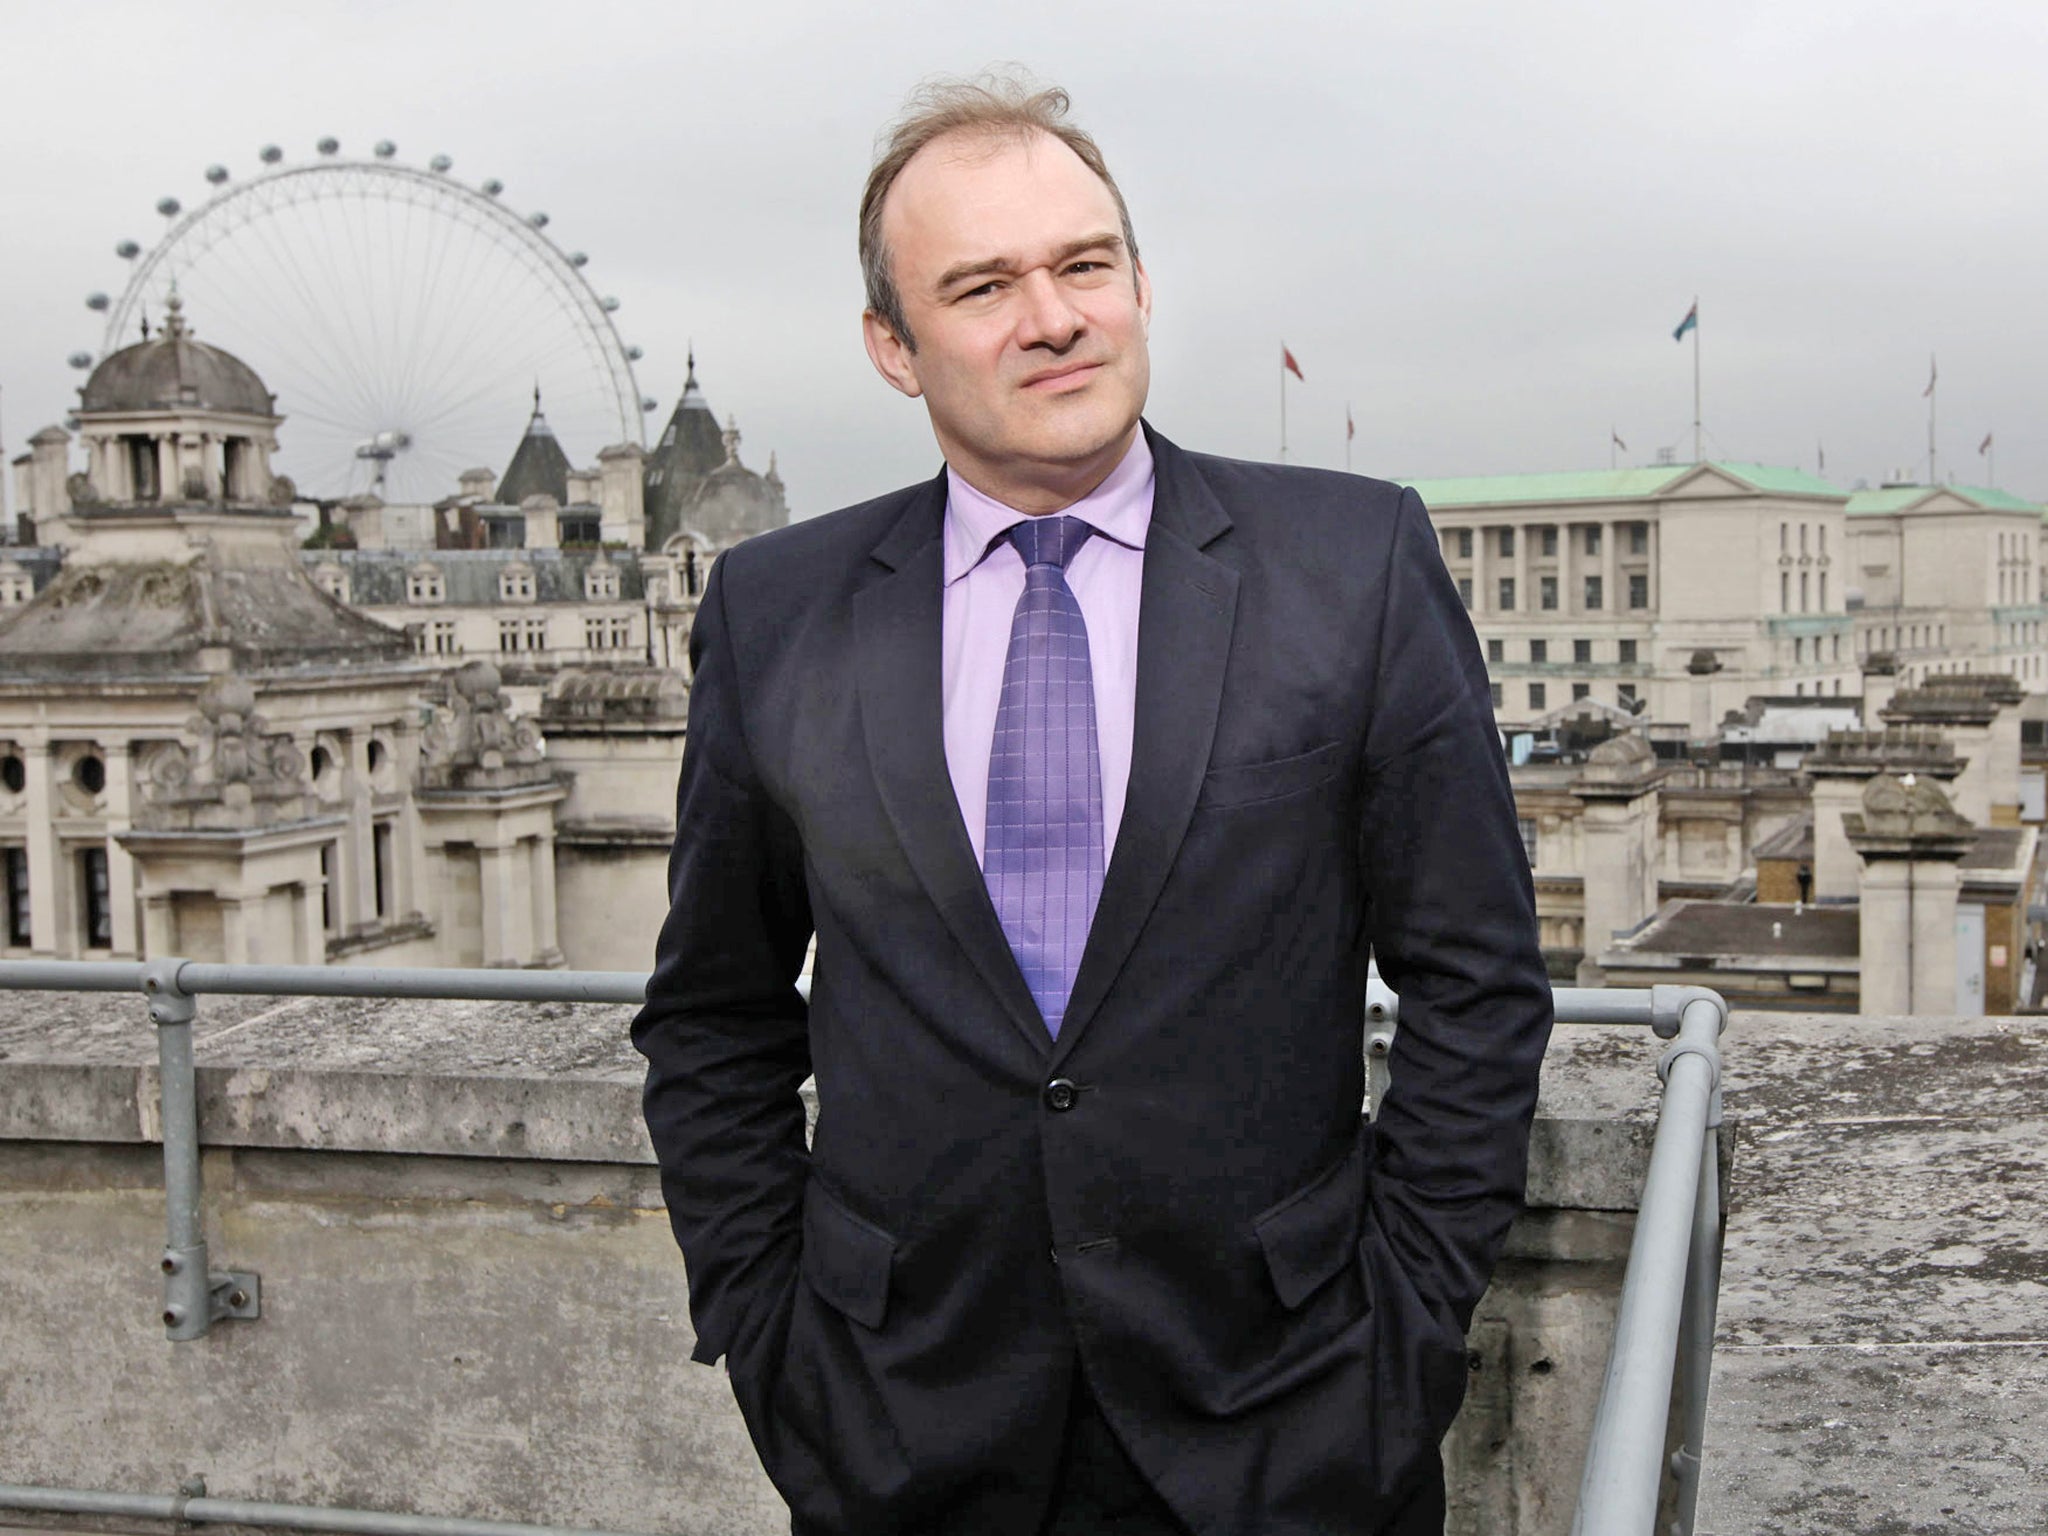 Ed Davey wants Britain to play a key role in tackling climate change